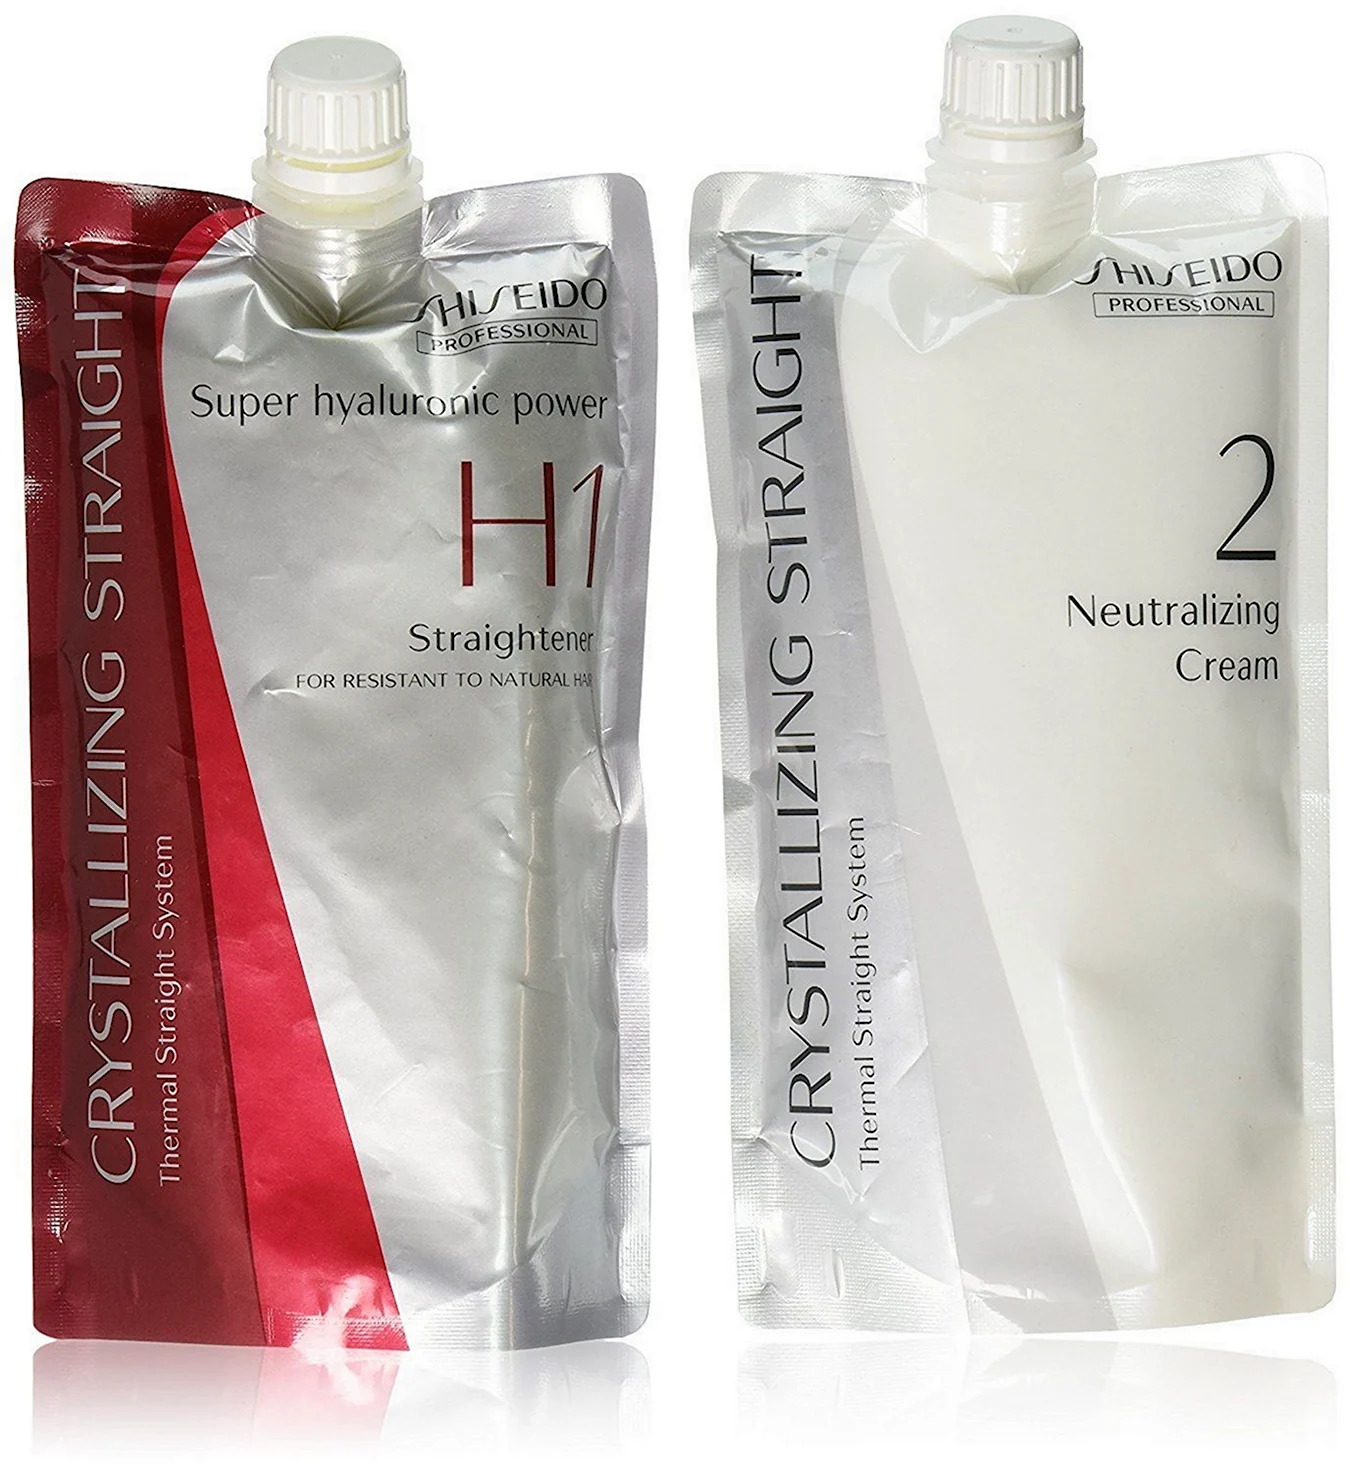 Shiseido crystallizing straight for Resistant to natural hair h1 h2